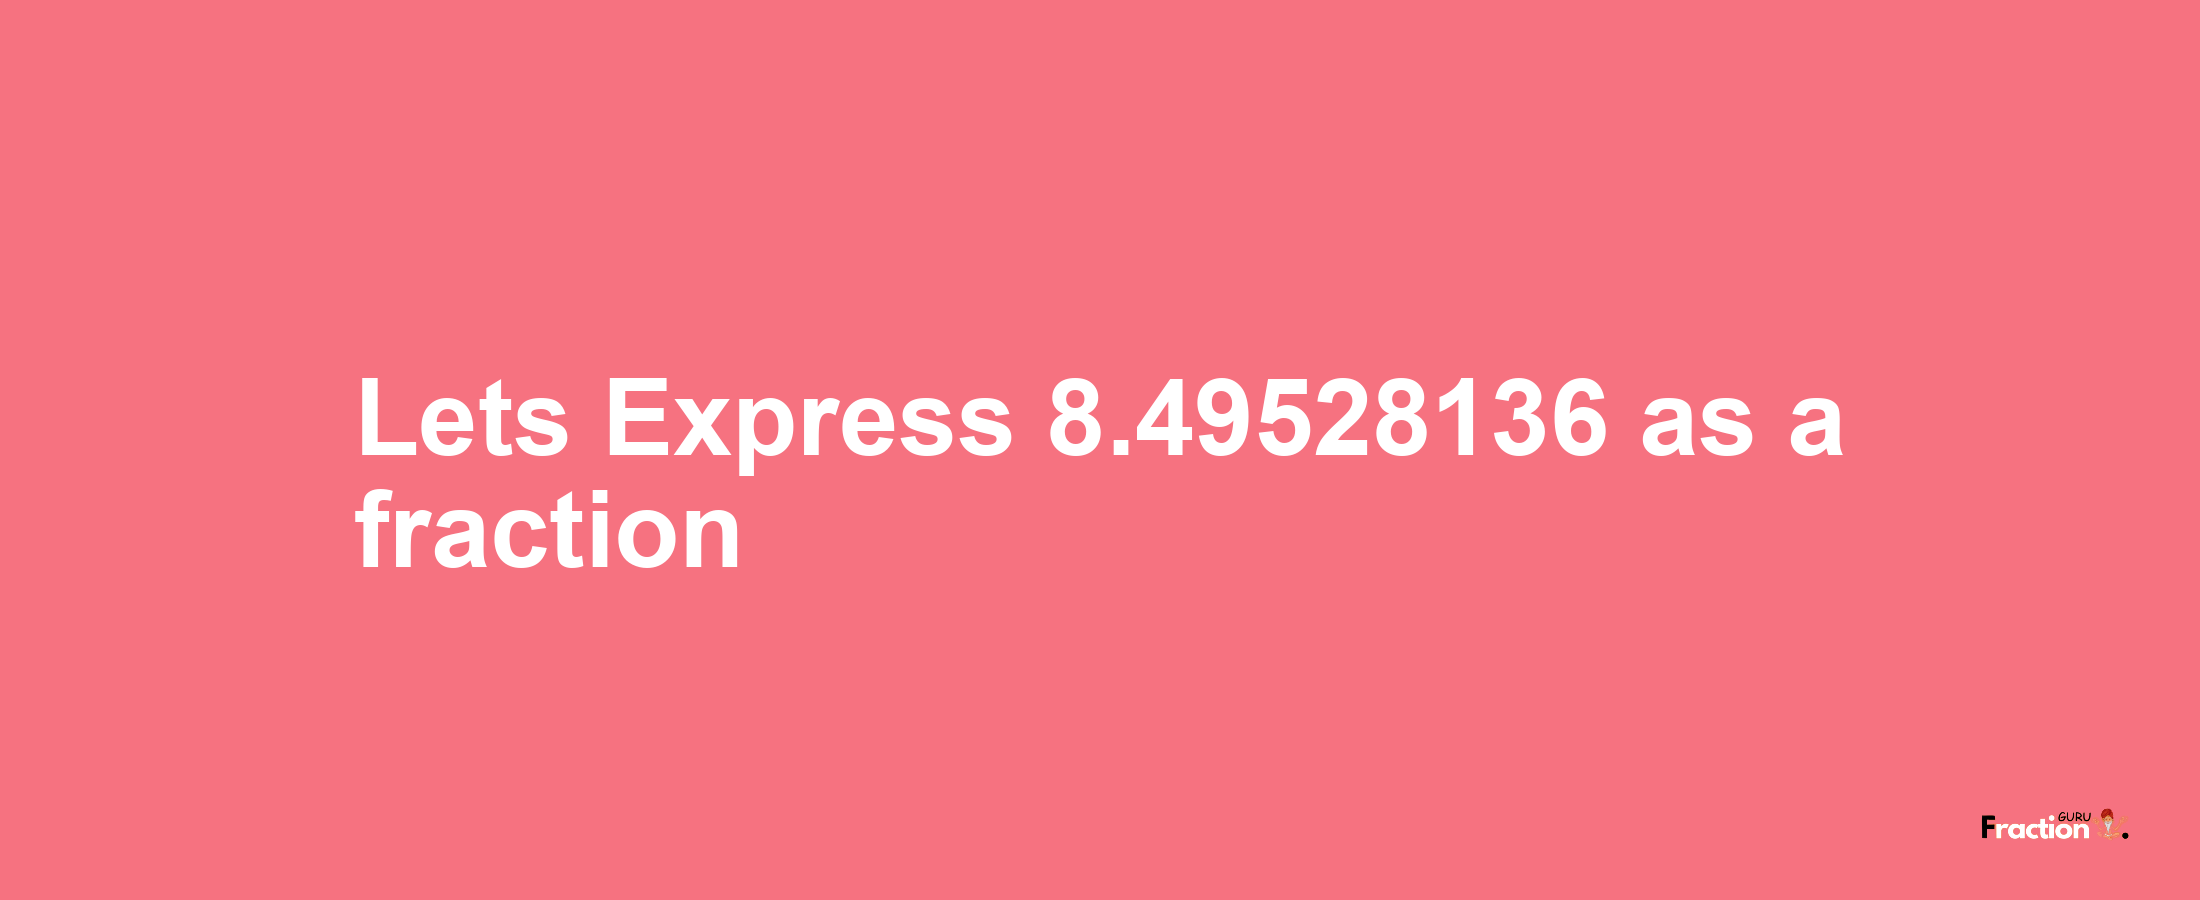 Lets Express 8.49528136 as afraction